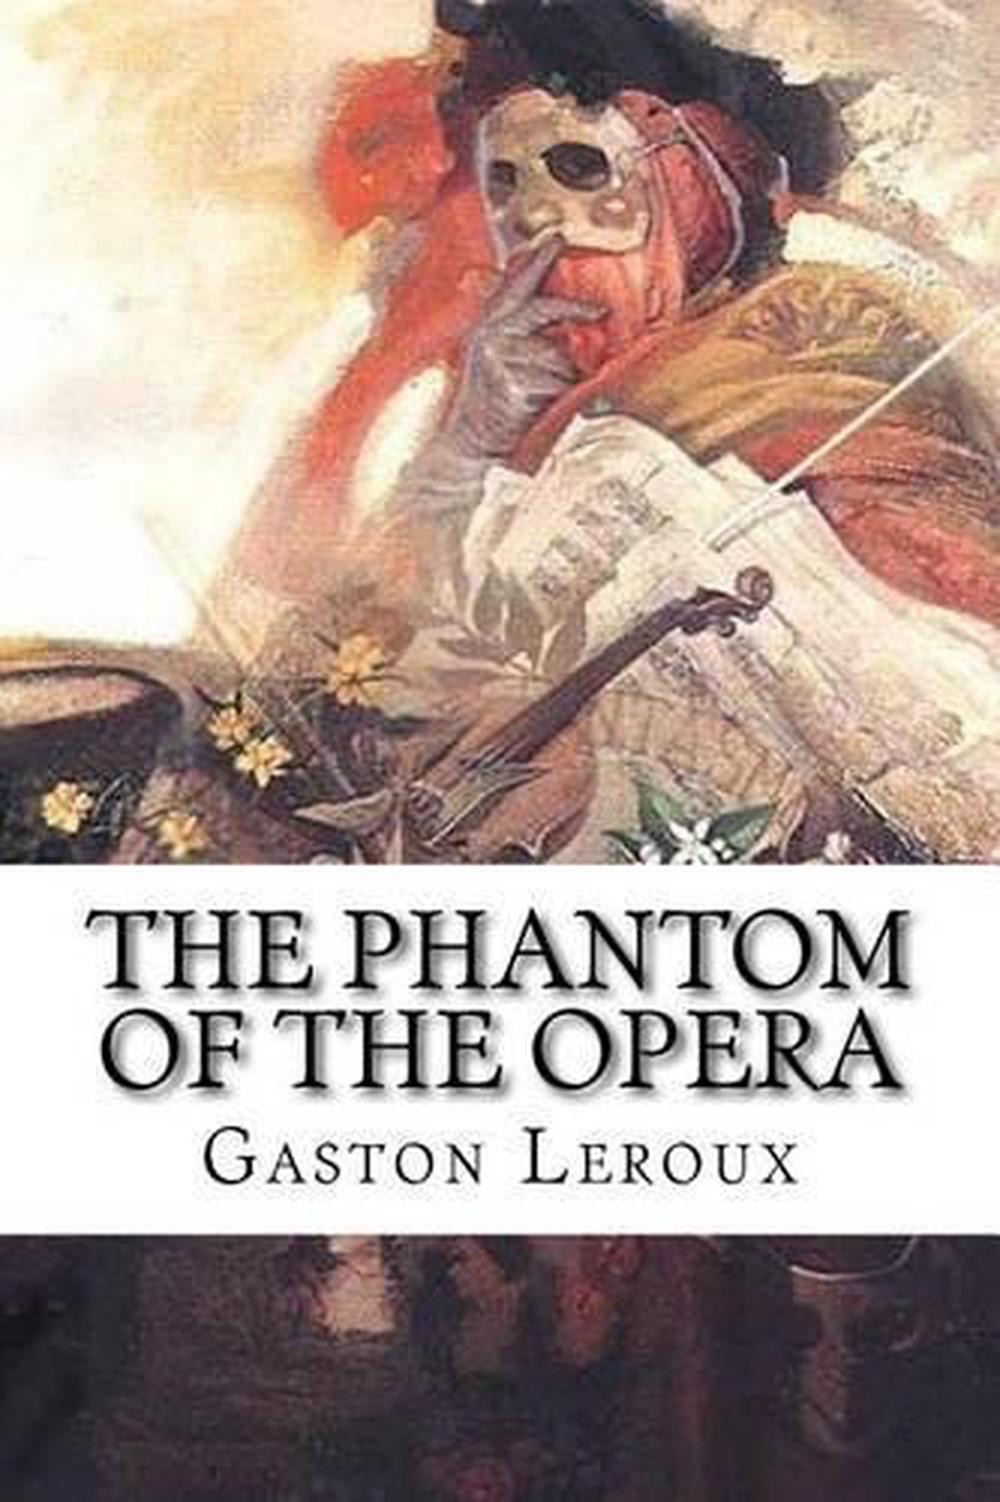 what year is the phantom of the opera book set in